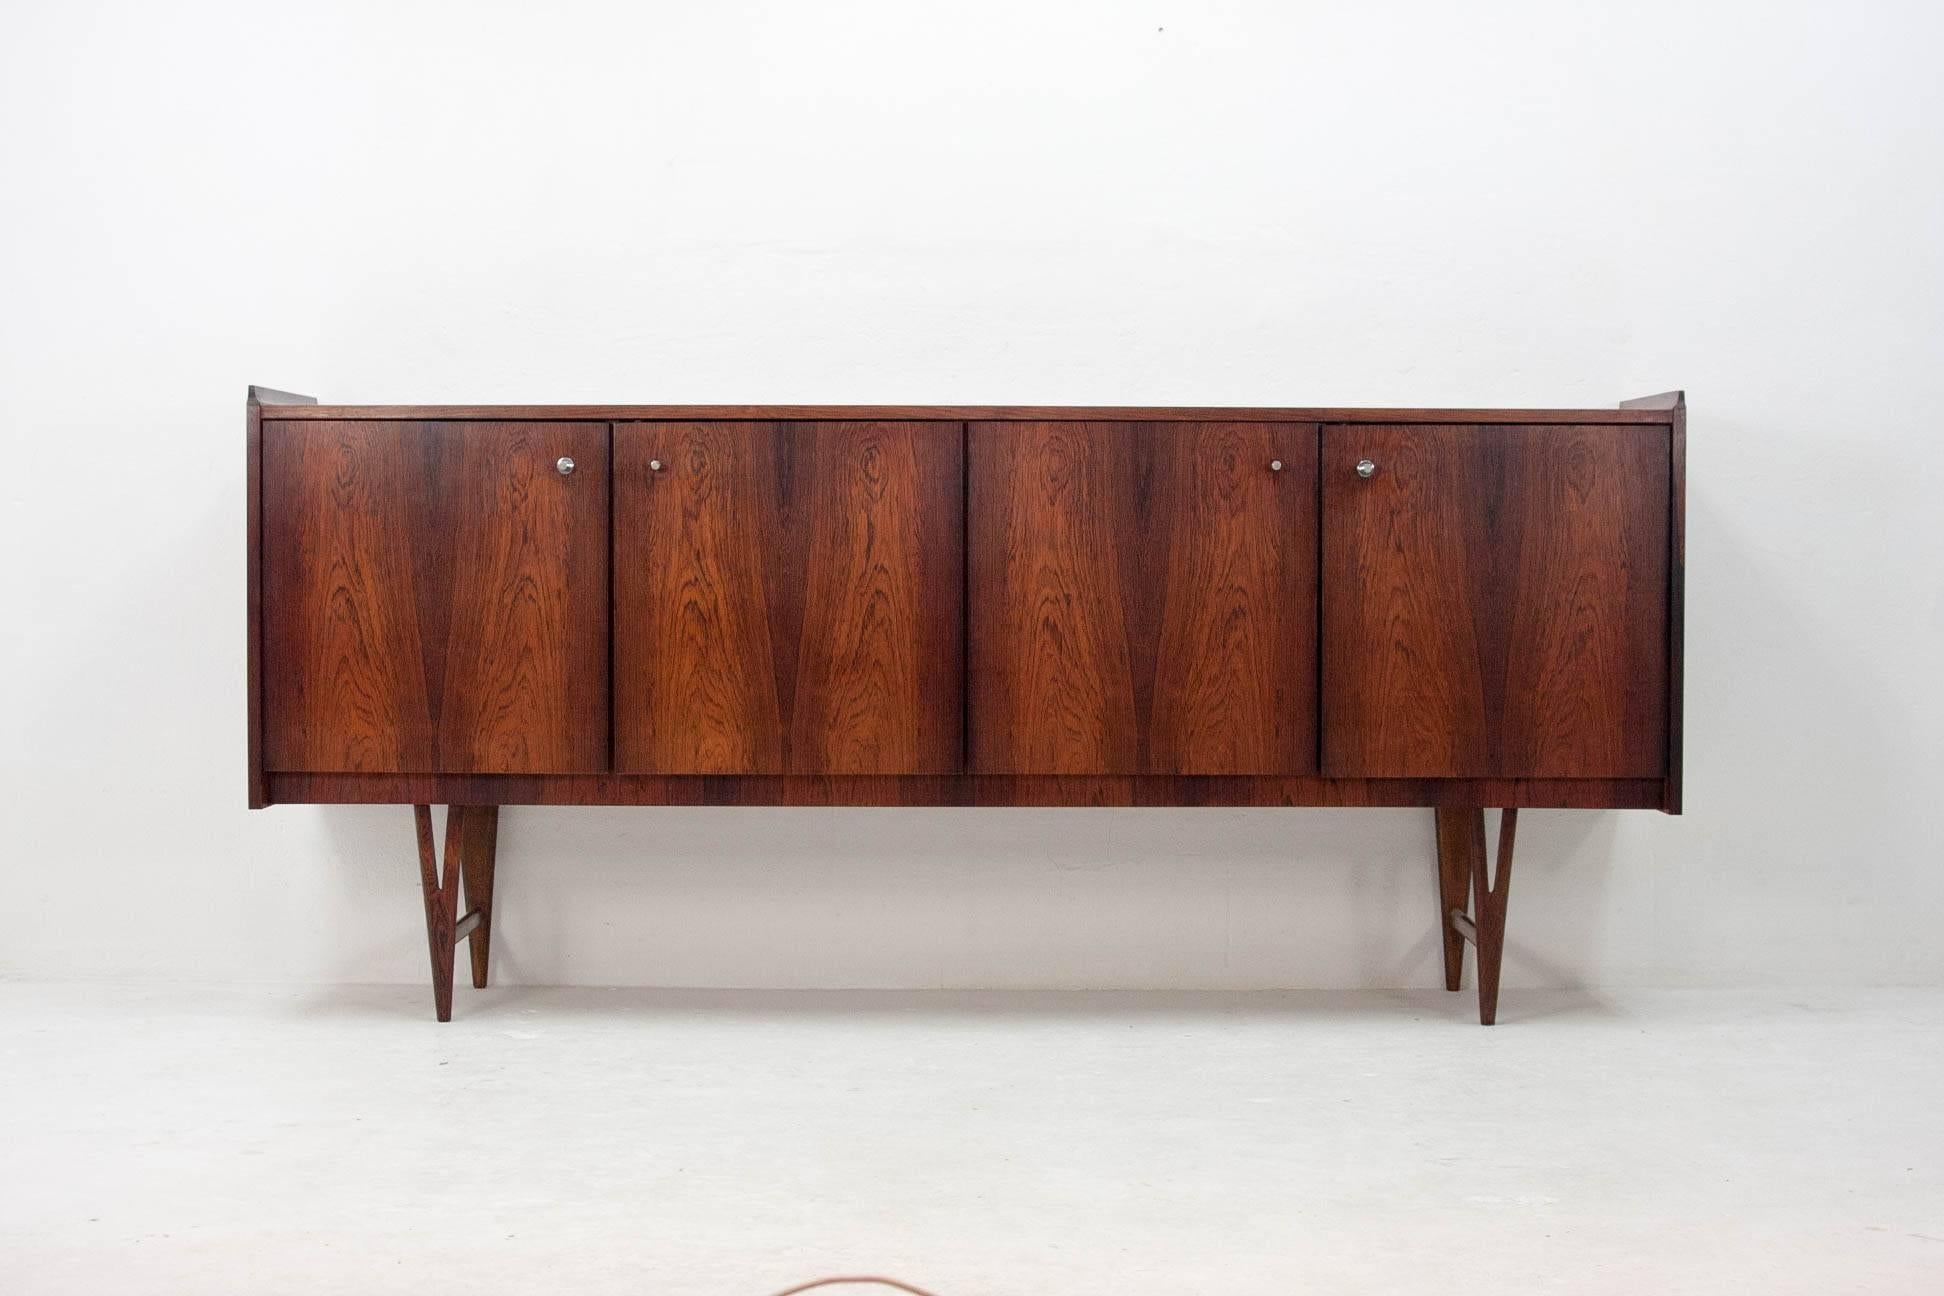 Elegant Fristho sideboard on high legs in rosewood veneer. Built by the Frysian Fristho company in the 1960s. Internally the sideboard is divided into three compartments, a large one on the right side featuring a single shelf and two small ones on